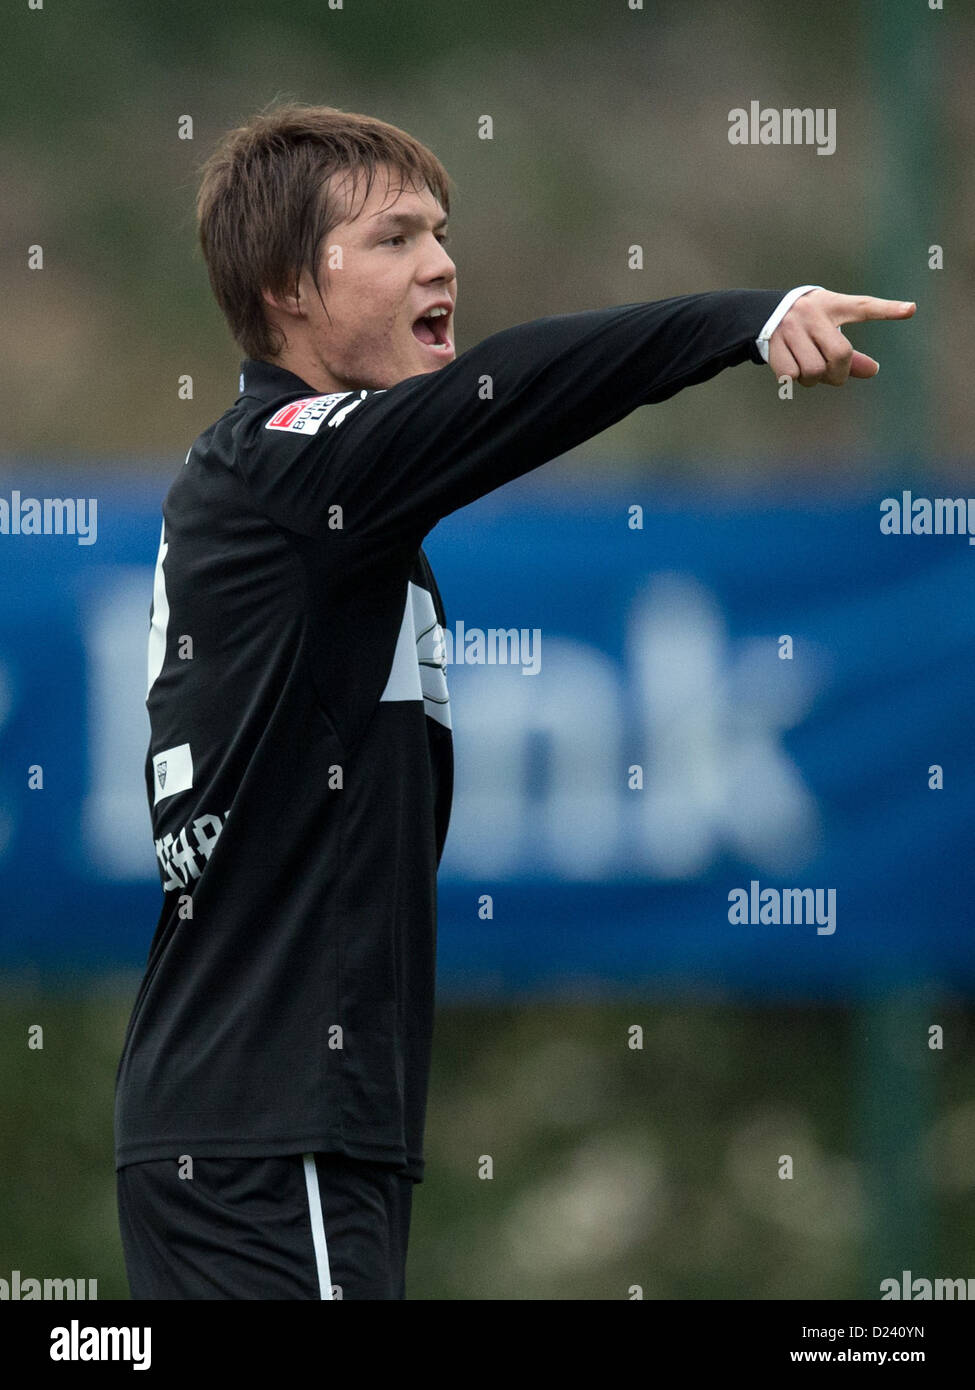 Stuttgart's Gotoku Sakai points to an opposing player during the friendly soccer match between Bundesliga soccer club VfB Stuttgart and Dutch Eredivisie soccer club RKC Waalwijk in Kardiye, Turkey, 11 January 2013. VfB Stuttgart ended their training camp with the match which ended 1-1 undecided. Photo: SOEREN STACHE Stock Photo